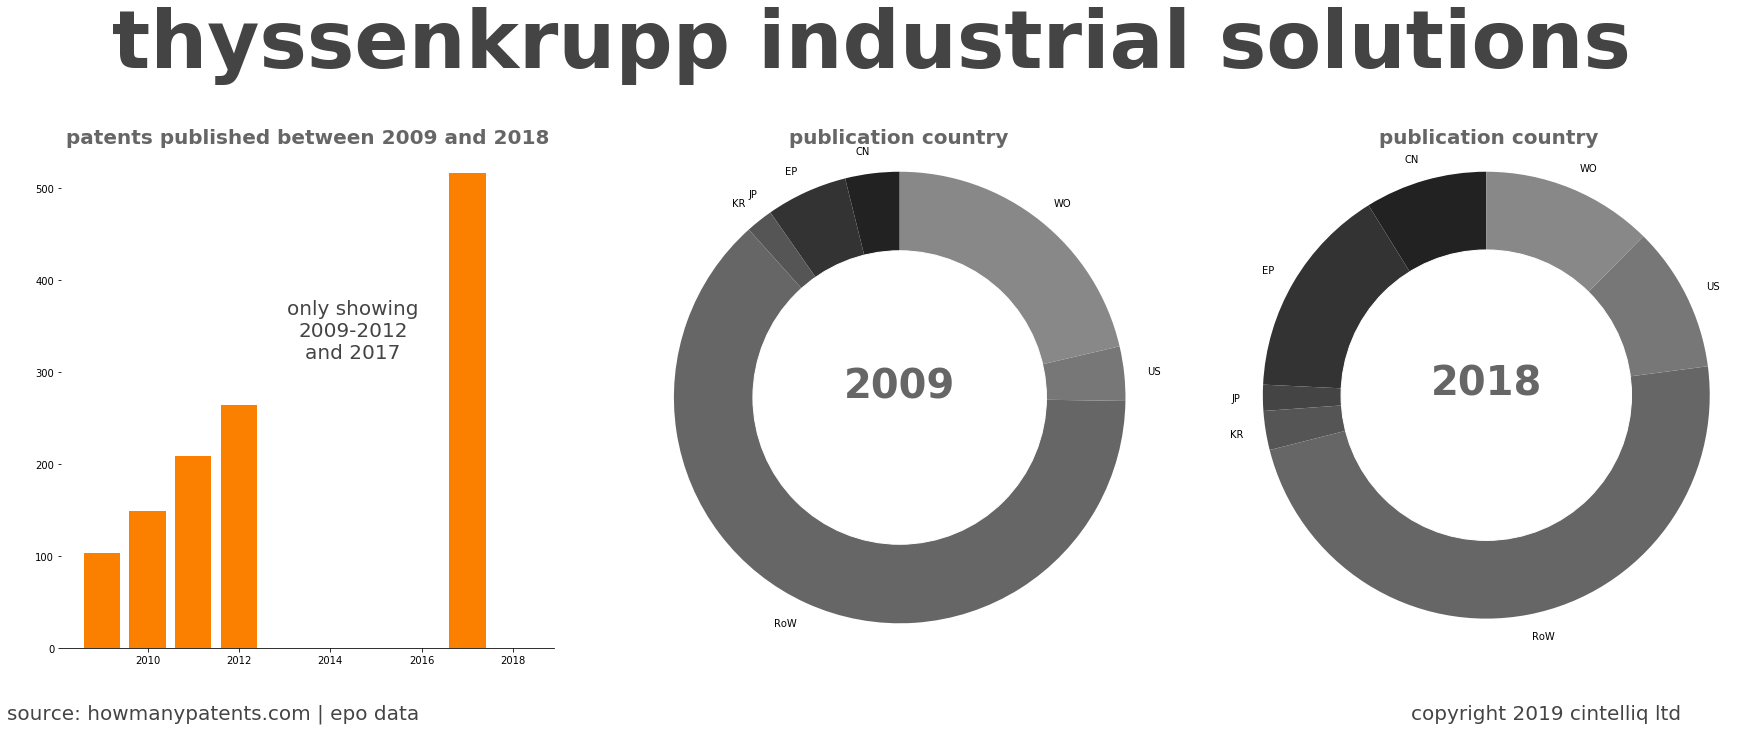 summary of patents for Thyssenkrupp Industrial Solutions